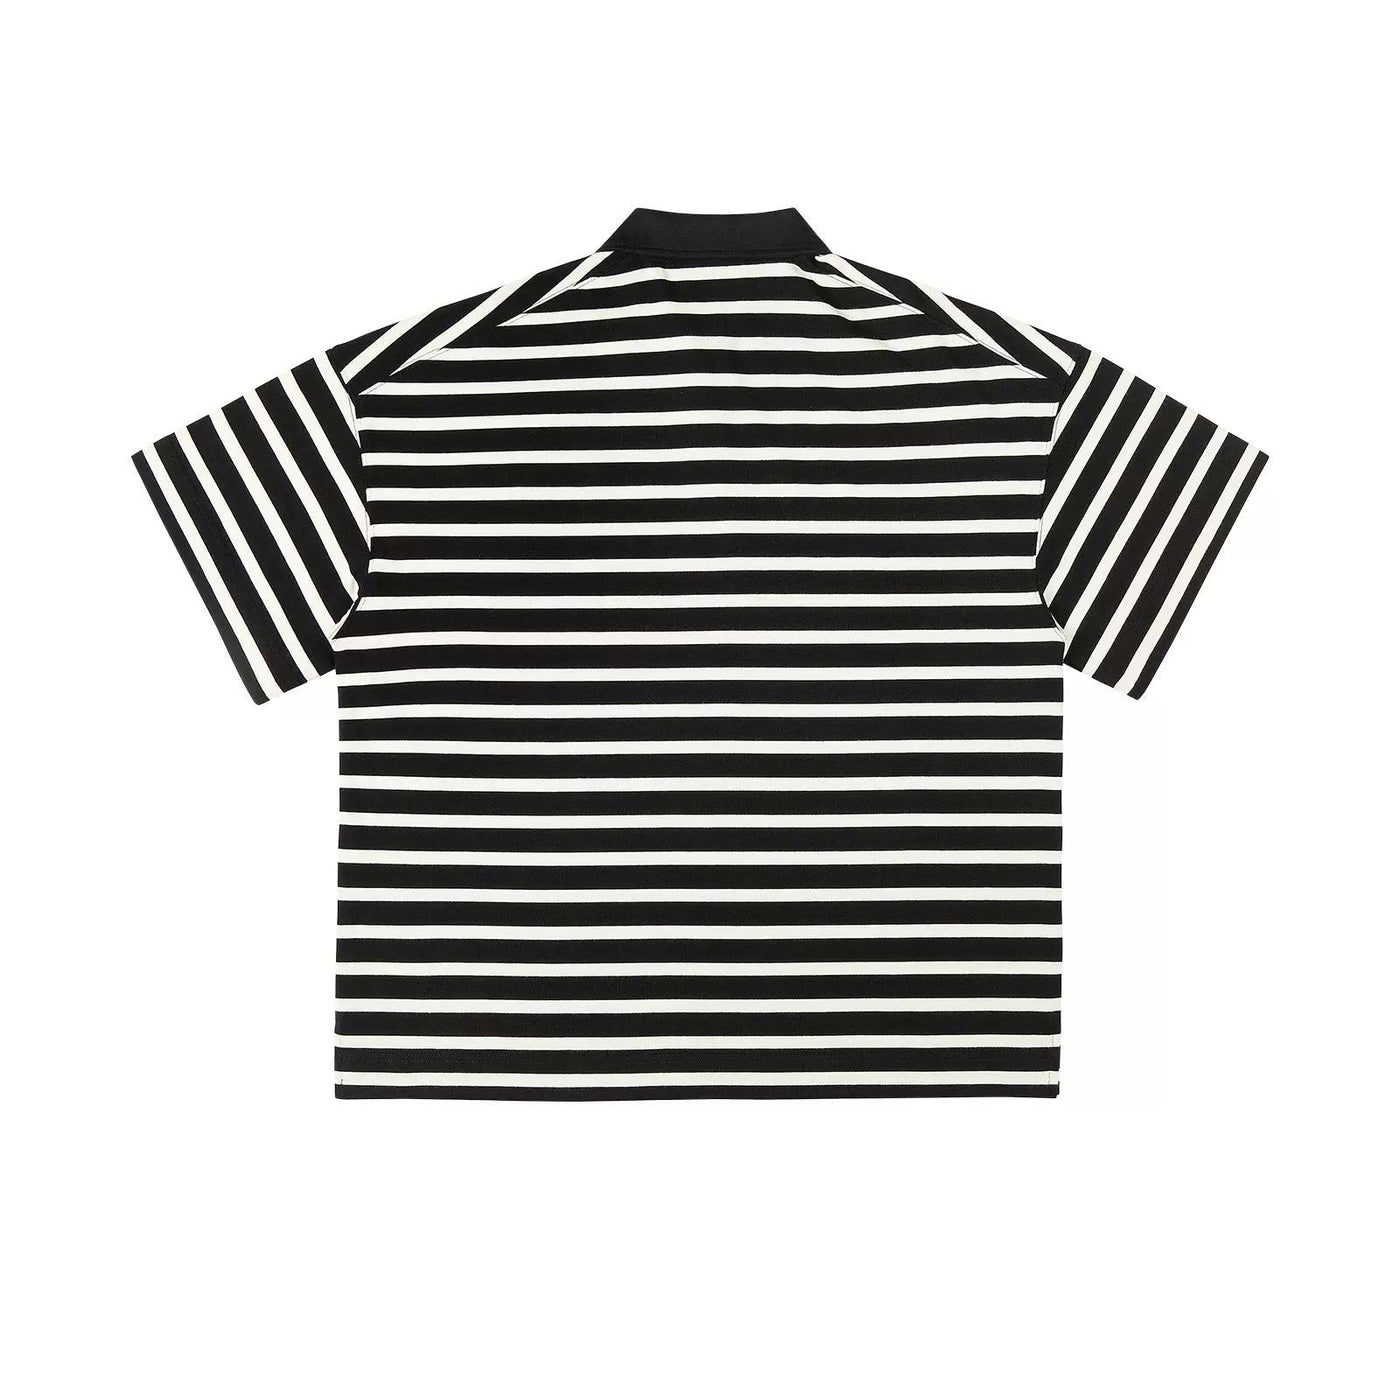 Regular Fit Striped Polo Korean Street Fashion Polo By IDLT Shop Online at OH Vault